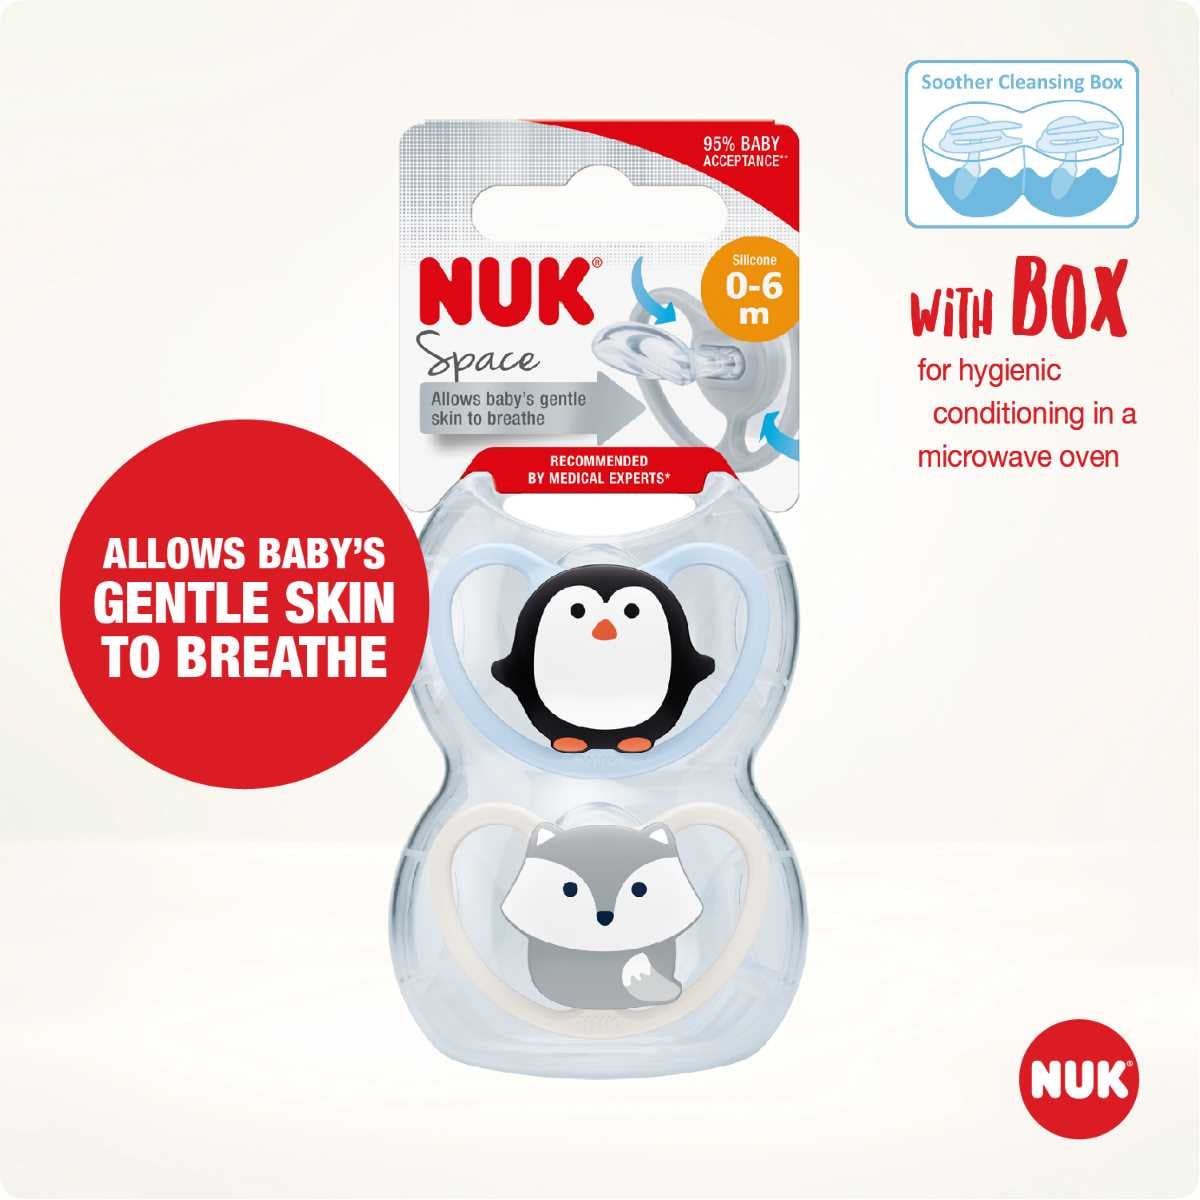 NUK Space Silicone Soother Boy 0-6 months